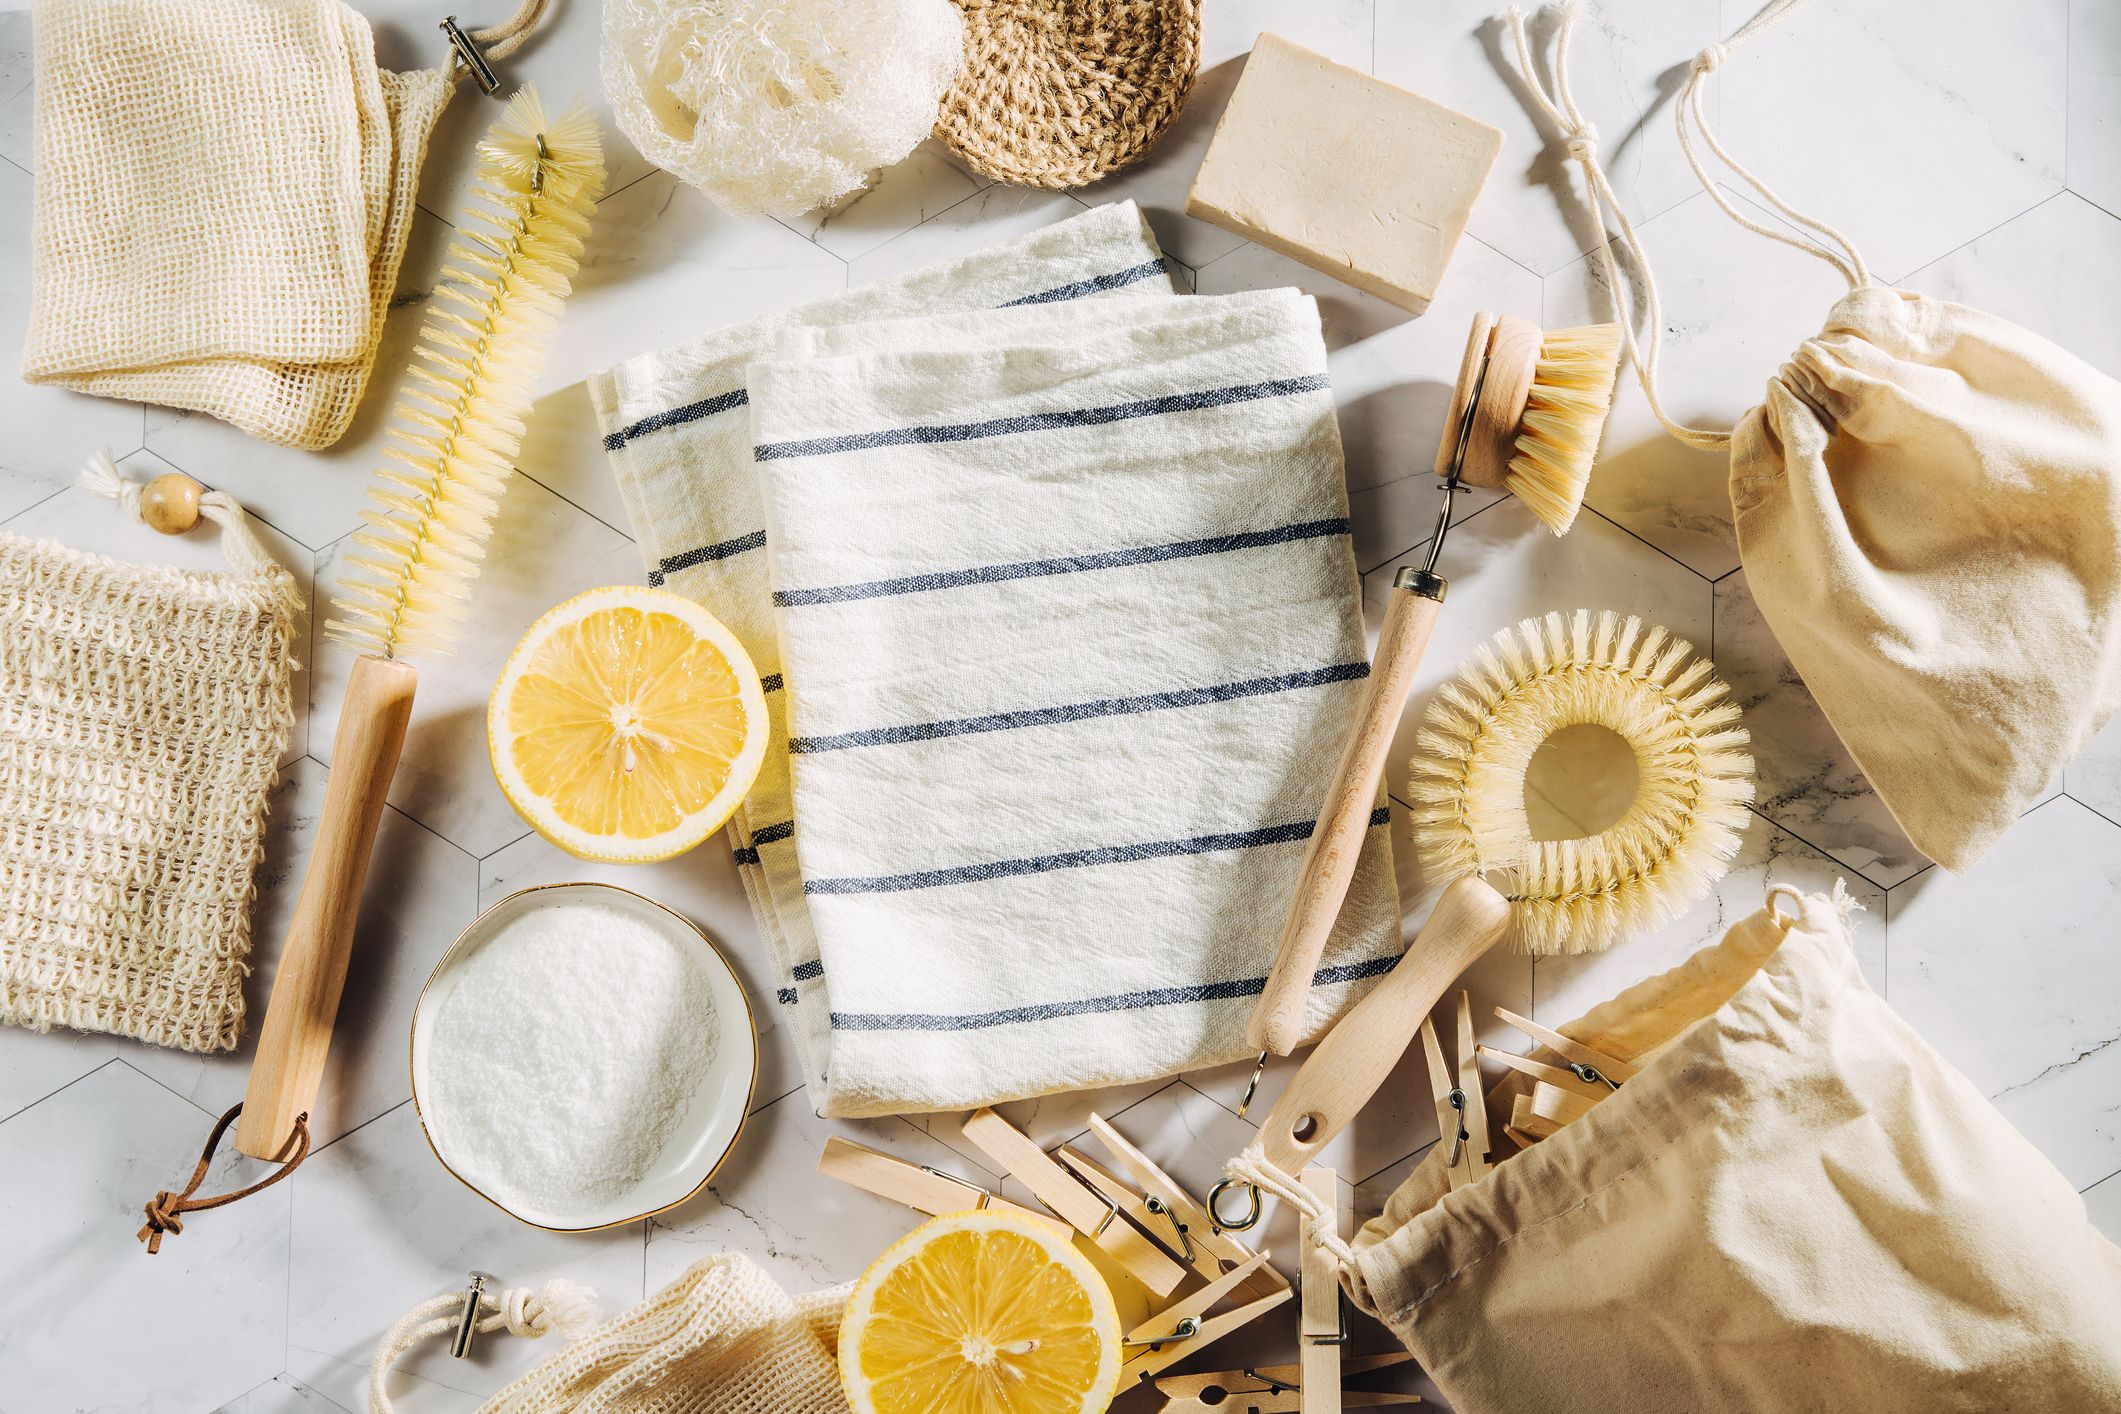 Why You Should Switch To Homemade Cleaners